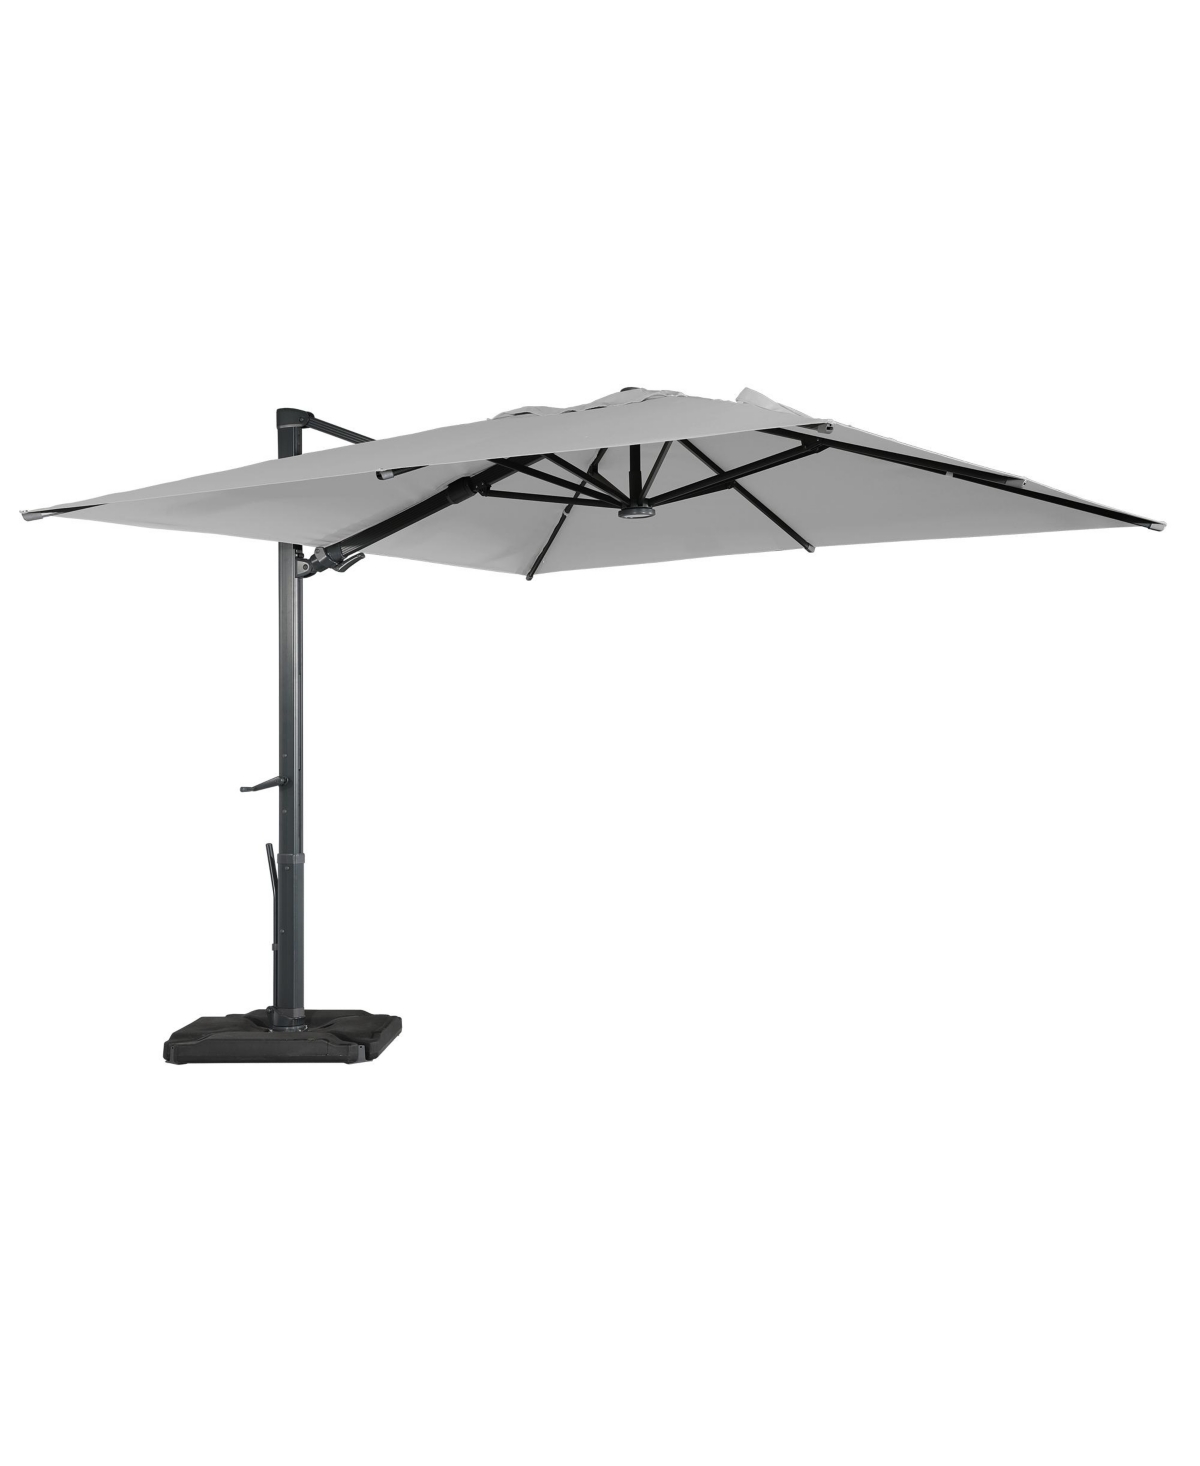 10ft Square Cantilever Solar Led Umbrella with Included Base Stand for Outdoor Sun Shade - Gray